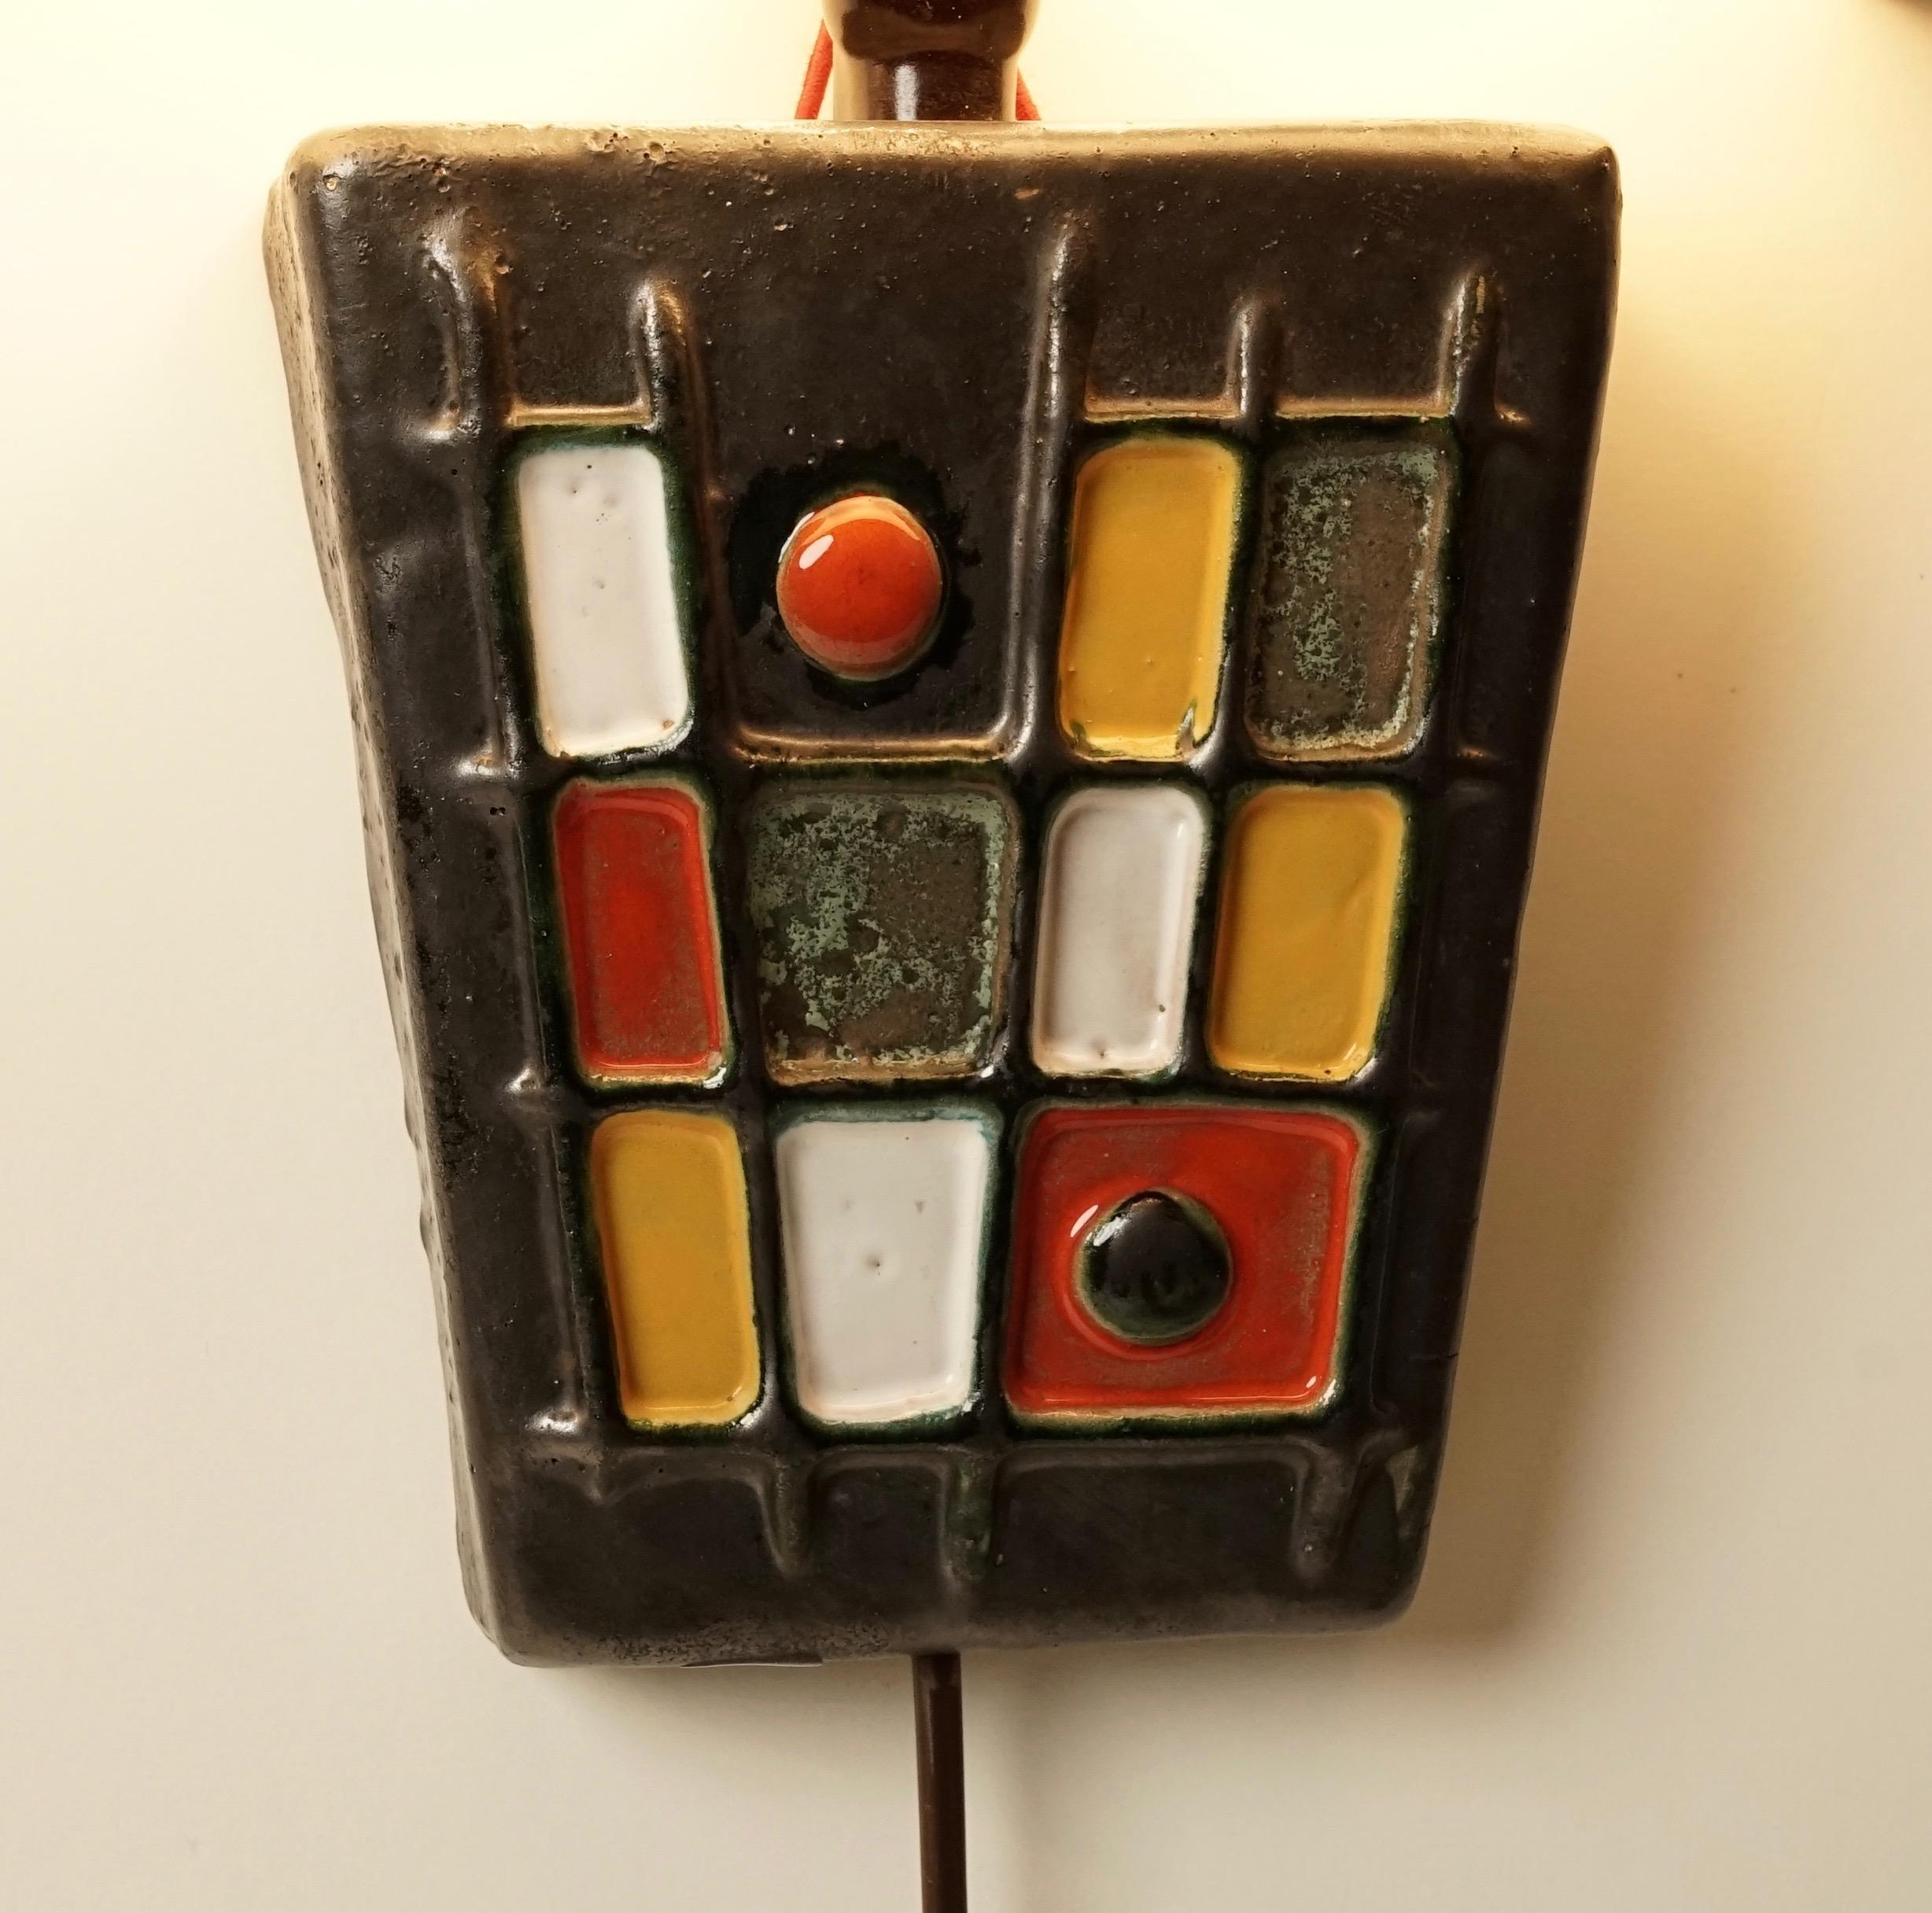 Glazed Pair of Modernist Wall Lights, From the Studio Ceramics Movement, 1950s Hungary